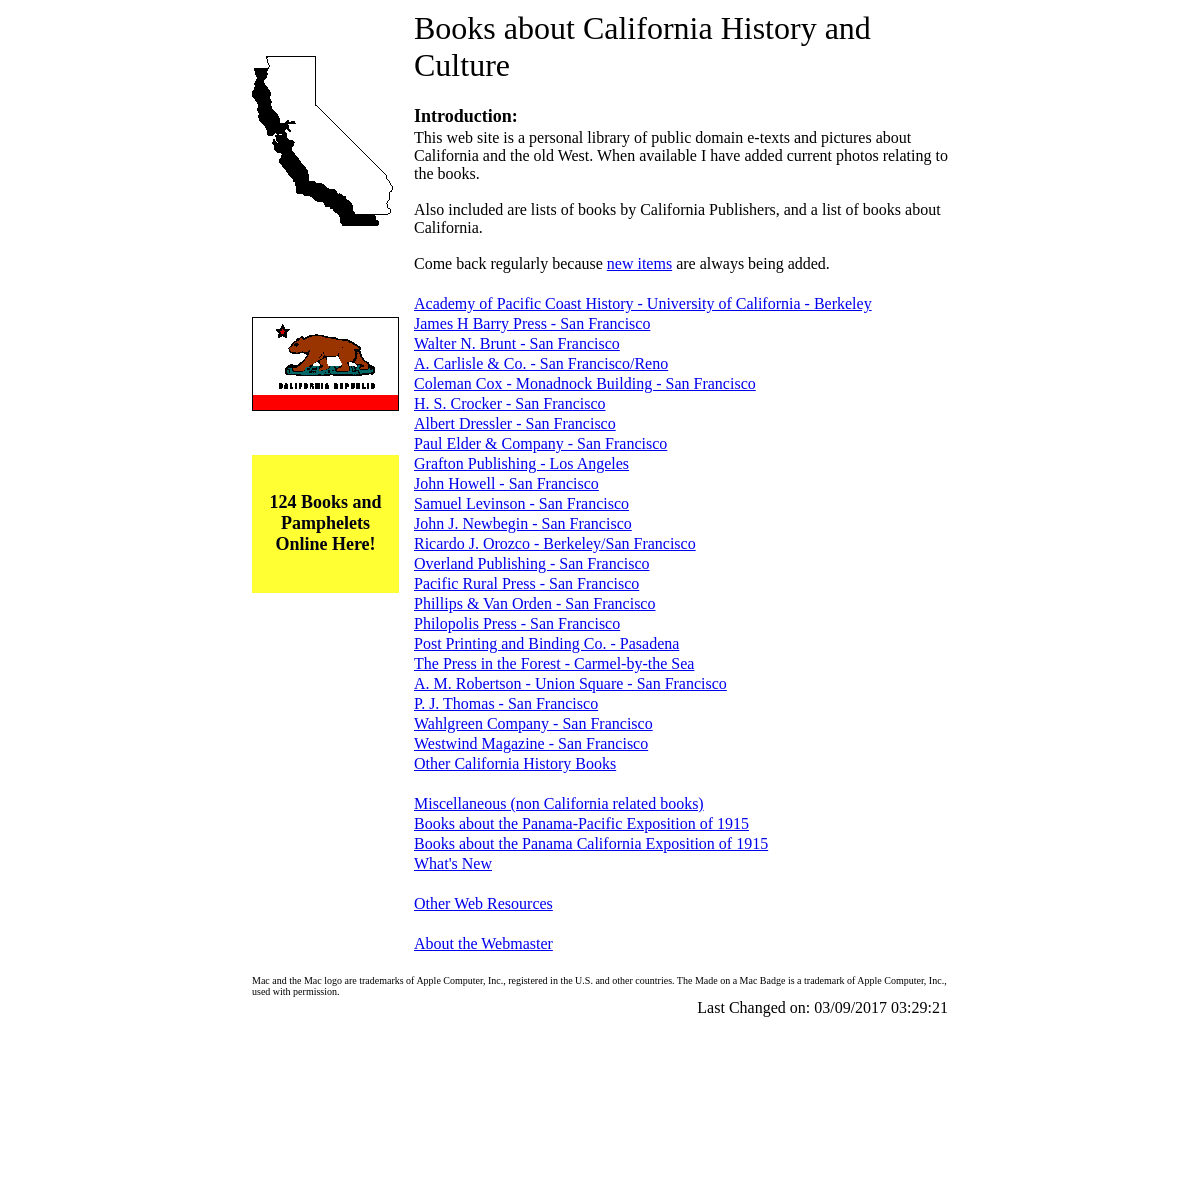 Books about California